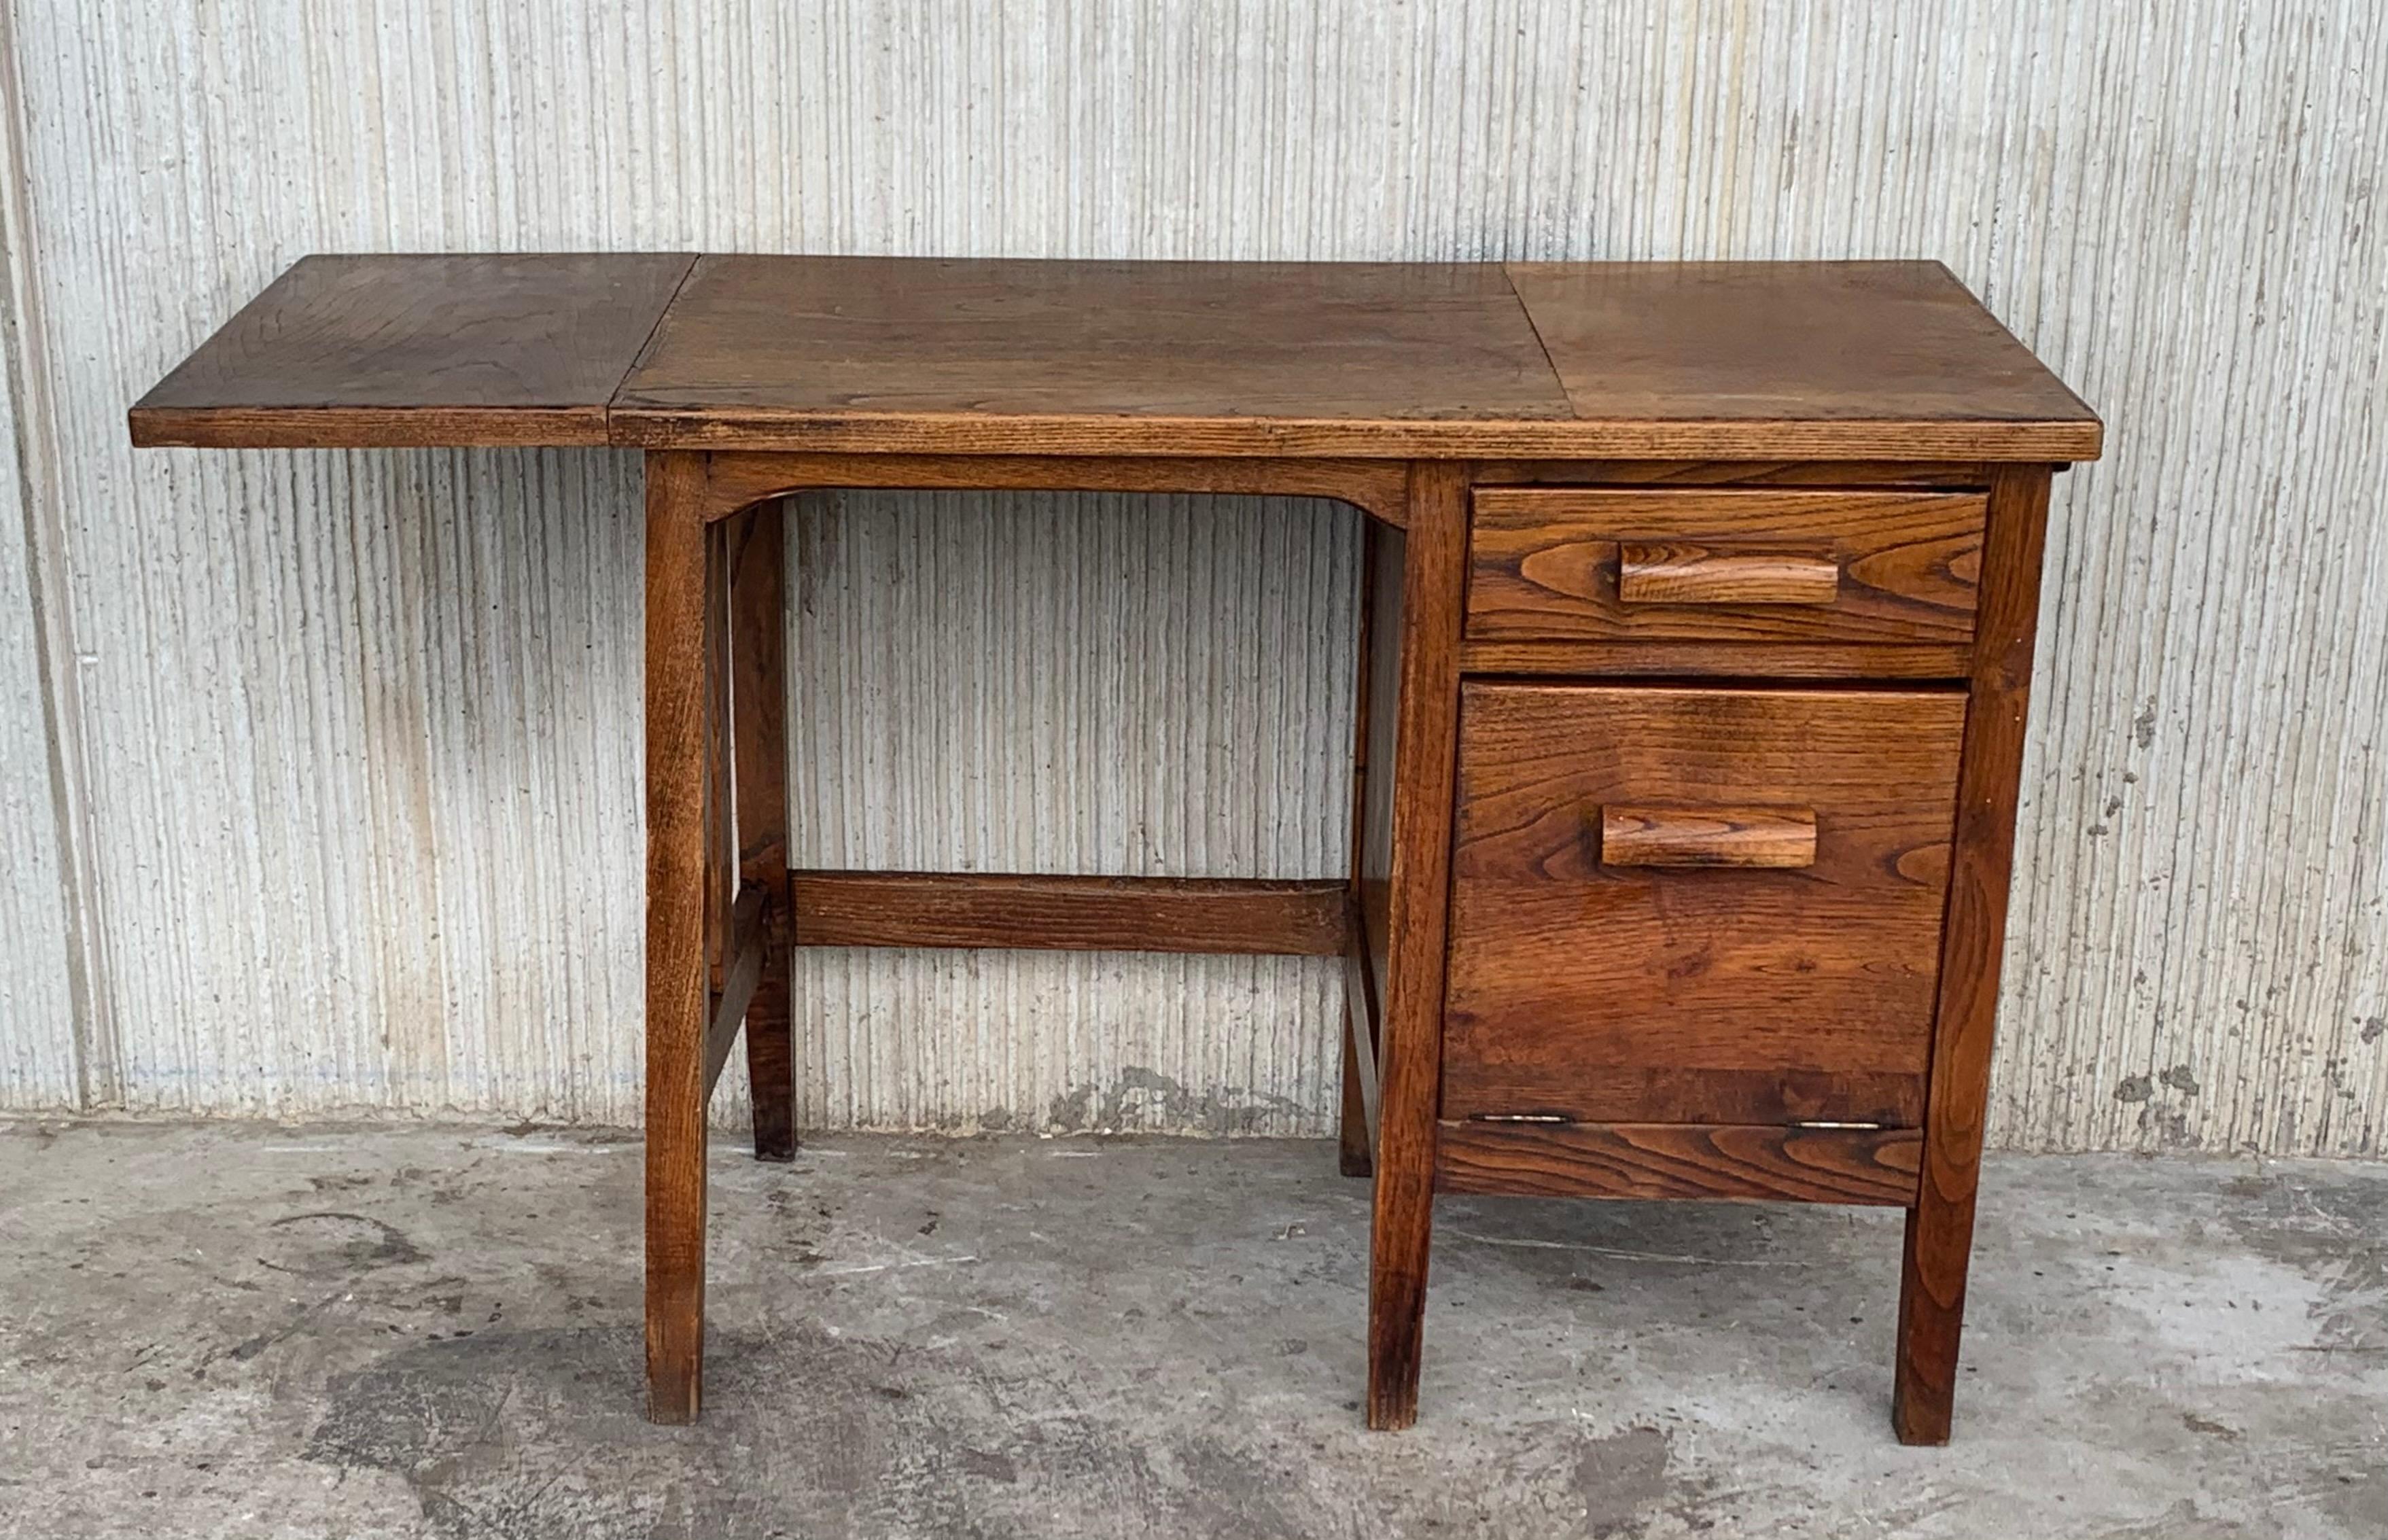 19th Spanish old pine desk with folding leaf and file space
Small desk made of native hardwood Mobila (a type of Spanish Pine). Featuring a pullout / pull-out drawer and a file drawer. The desk has a folding side for more space on the top.
The